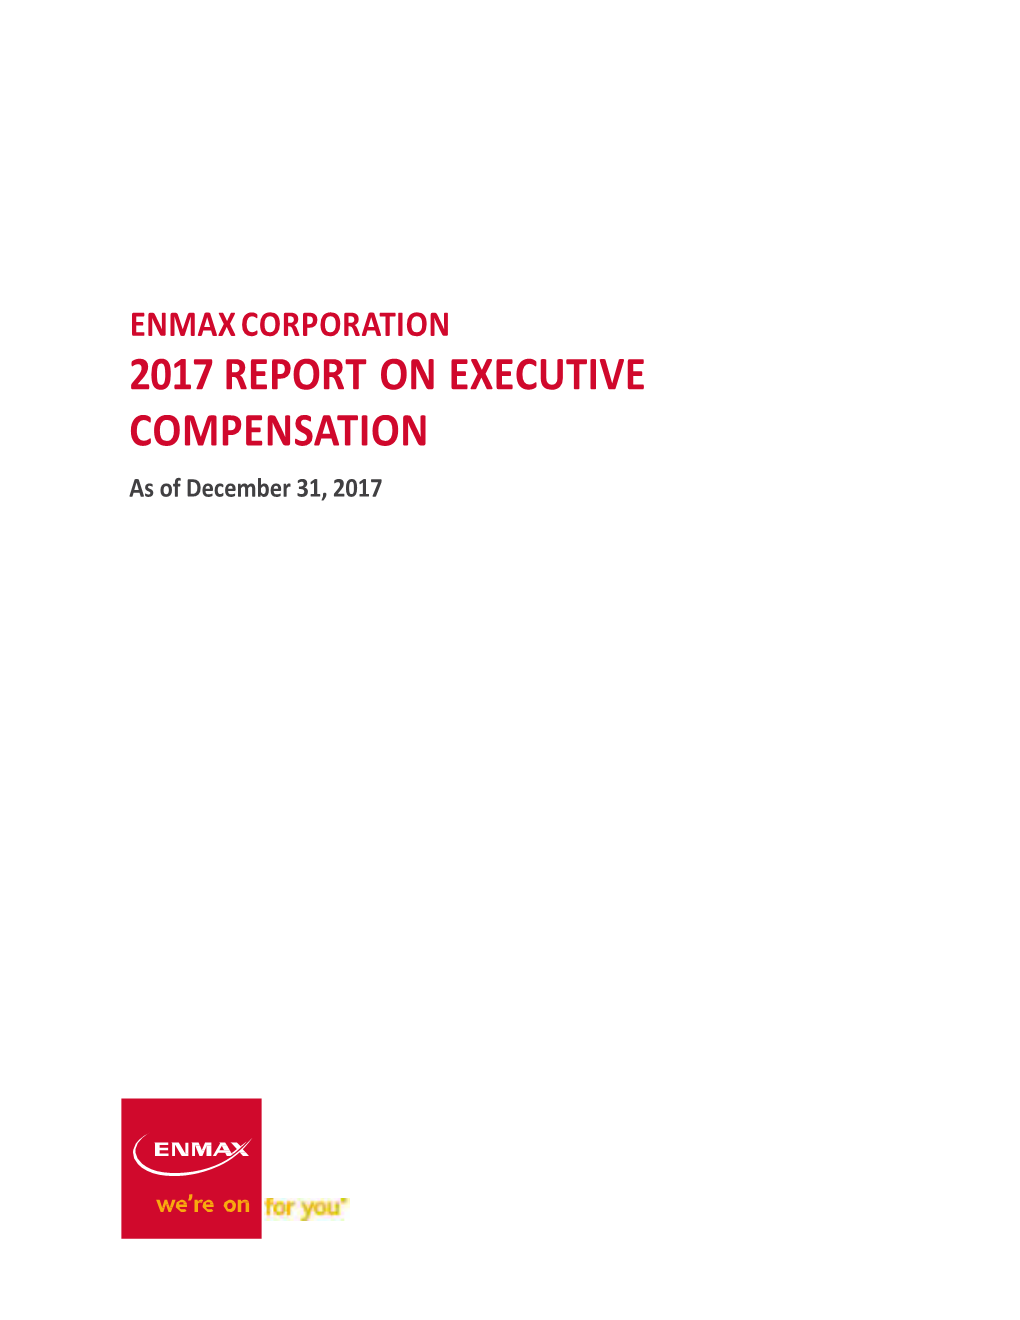 2017 Report on Executive Compensation